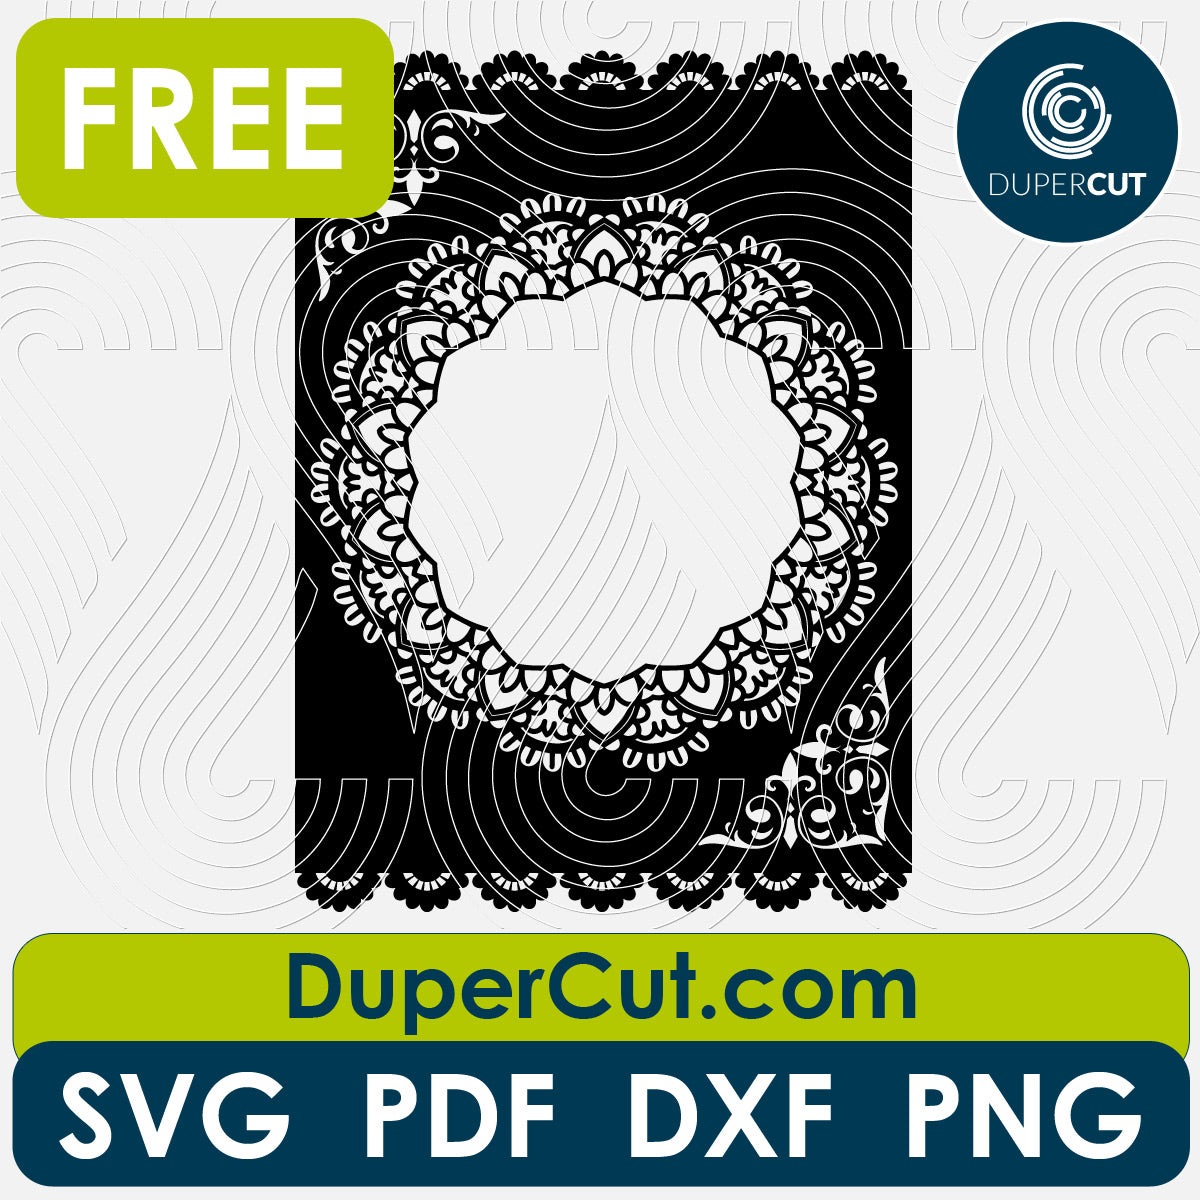 Blank wedding card invitation, FREE cutting template SVG PNG DXF files for Glowforge, Cricut, Silhouette, CNC laser router by DuperCut.com